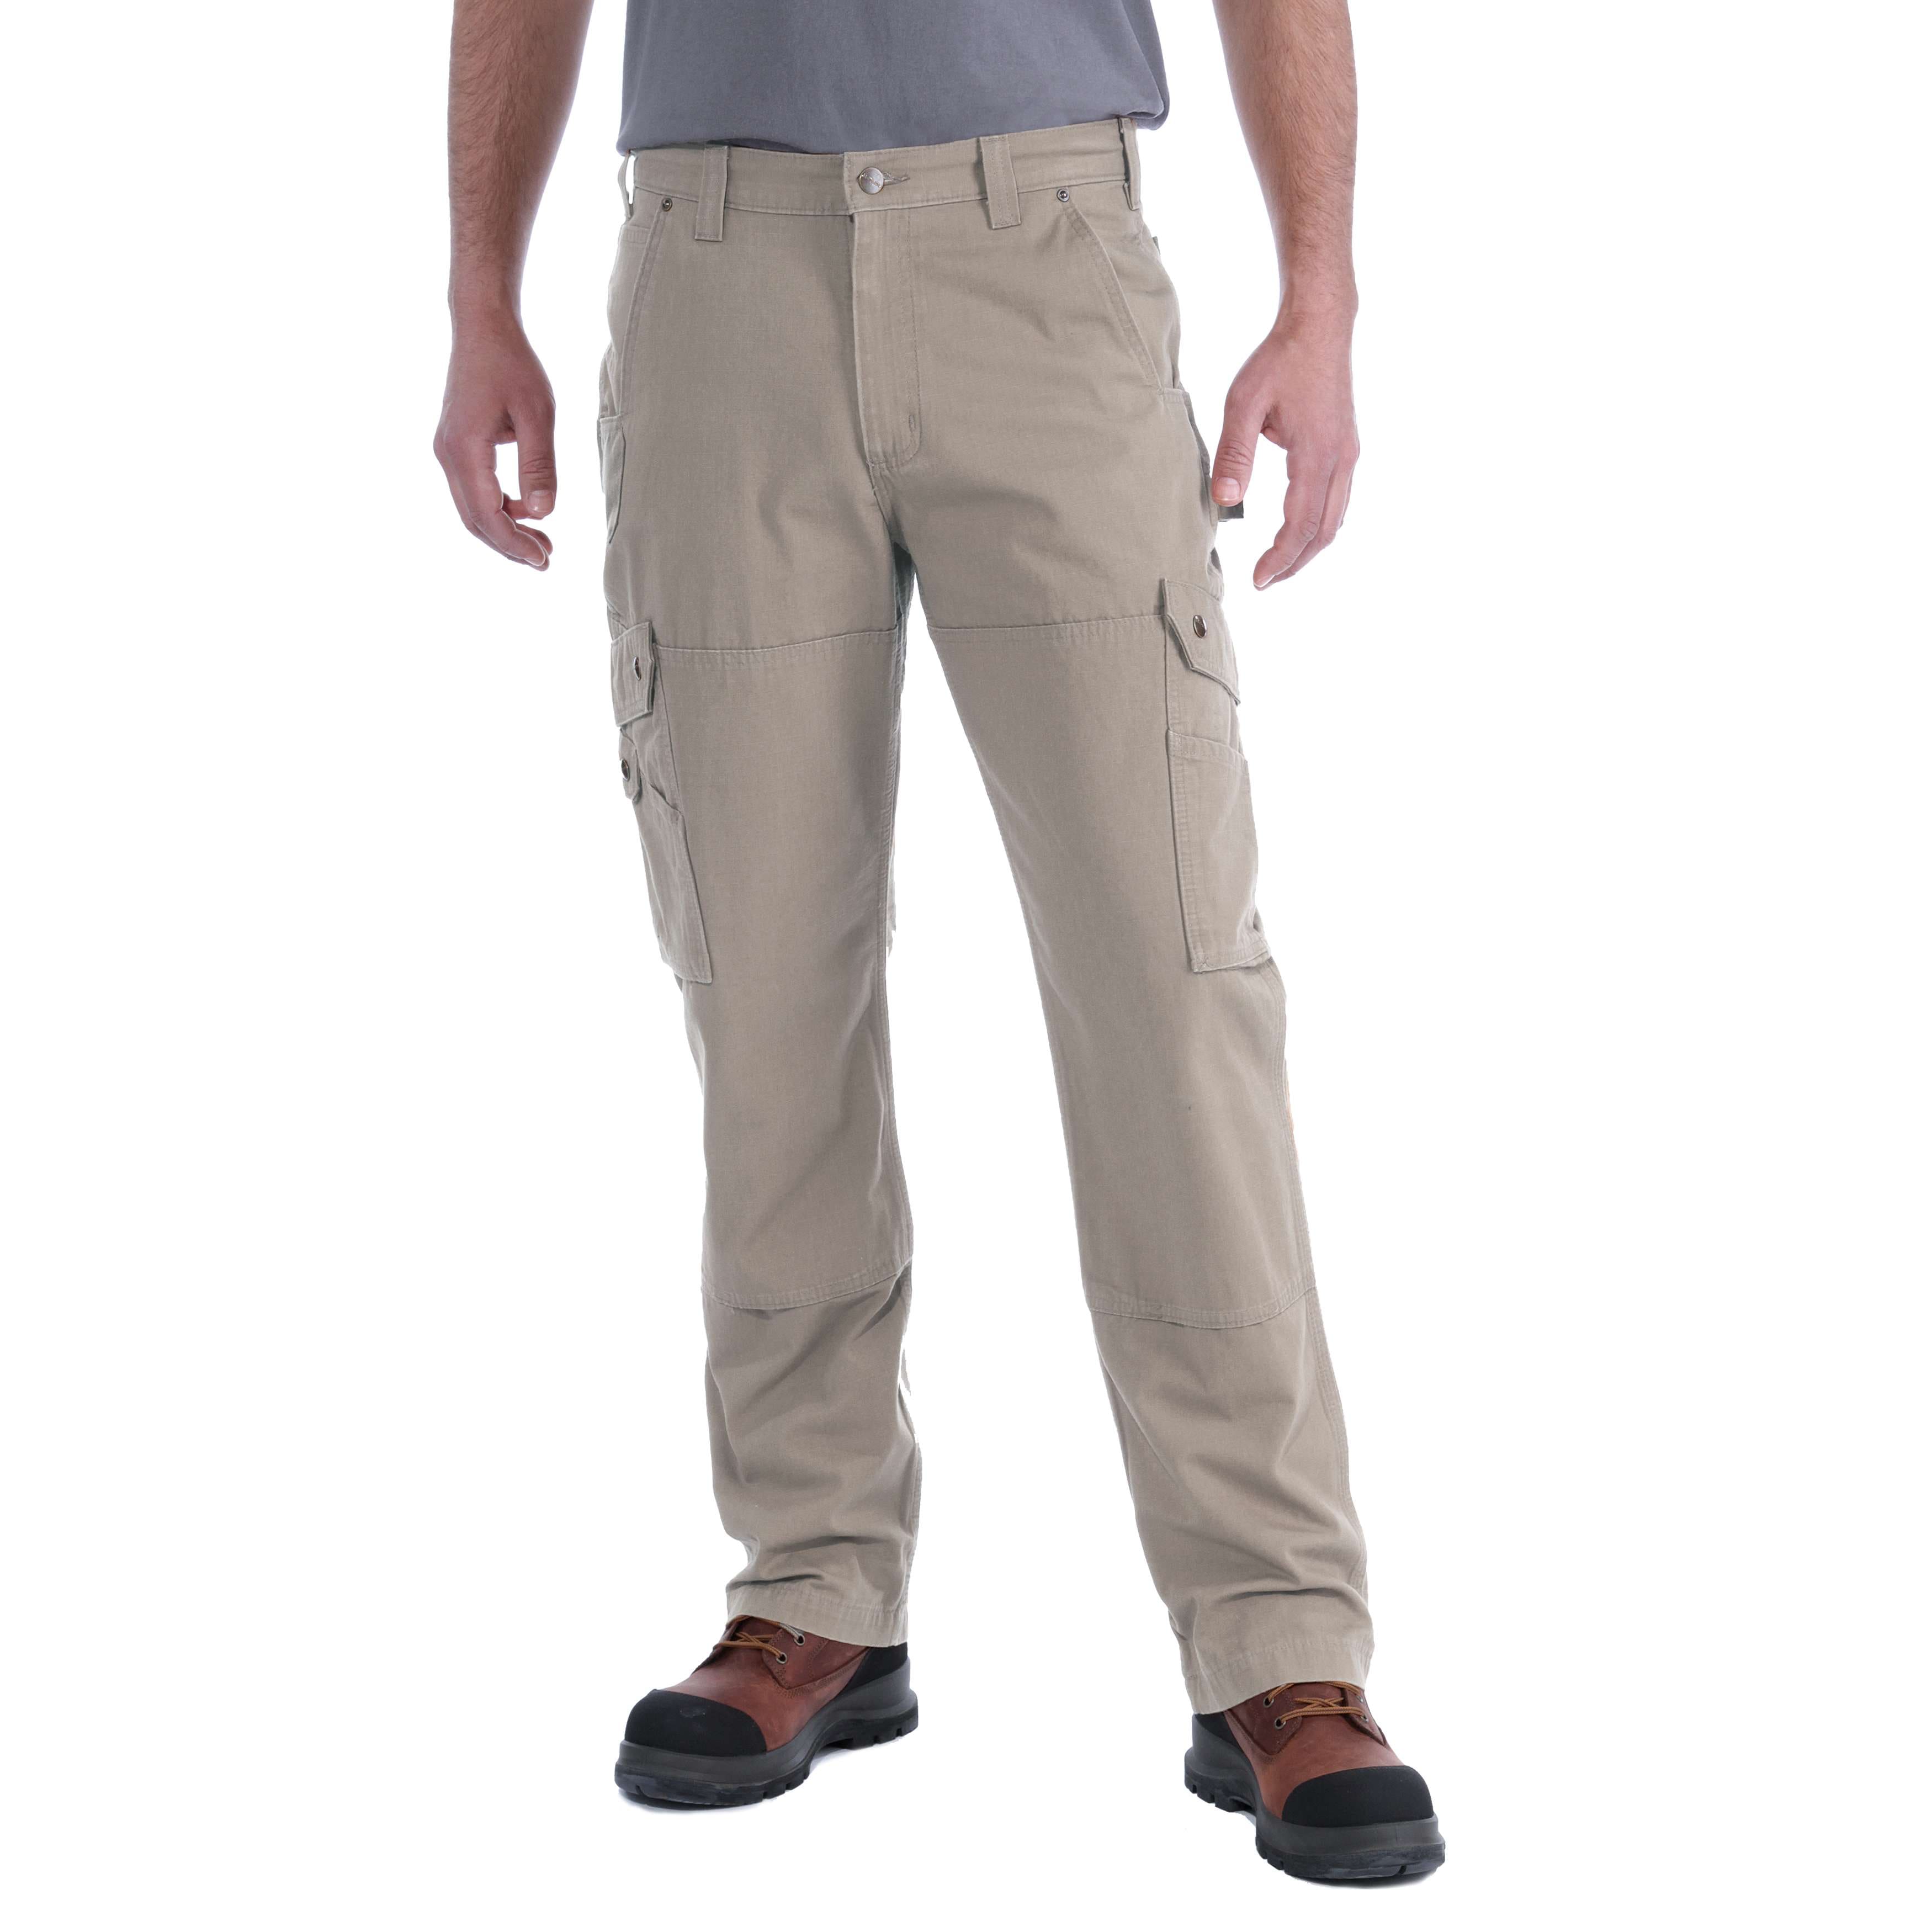 Loose Fit Firm Duck Double-Front Utility Work Pant, Carhartt Knee Pads 